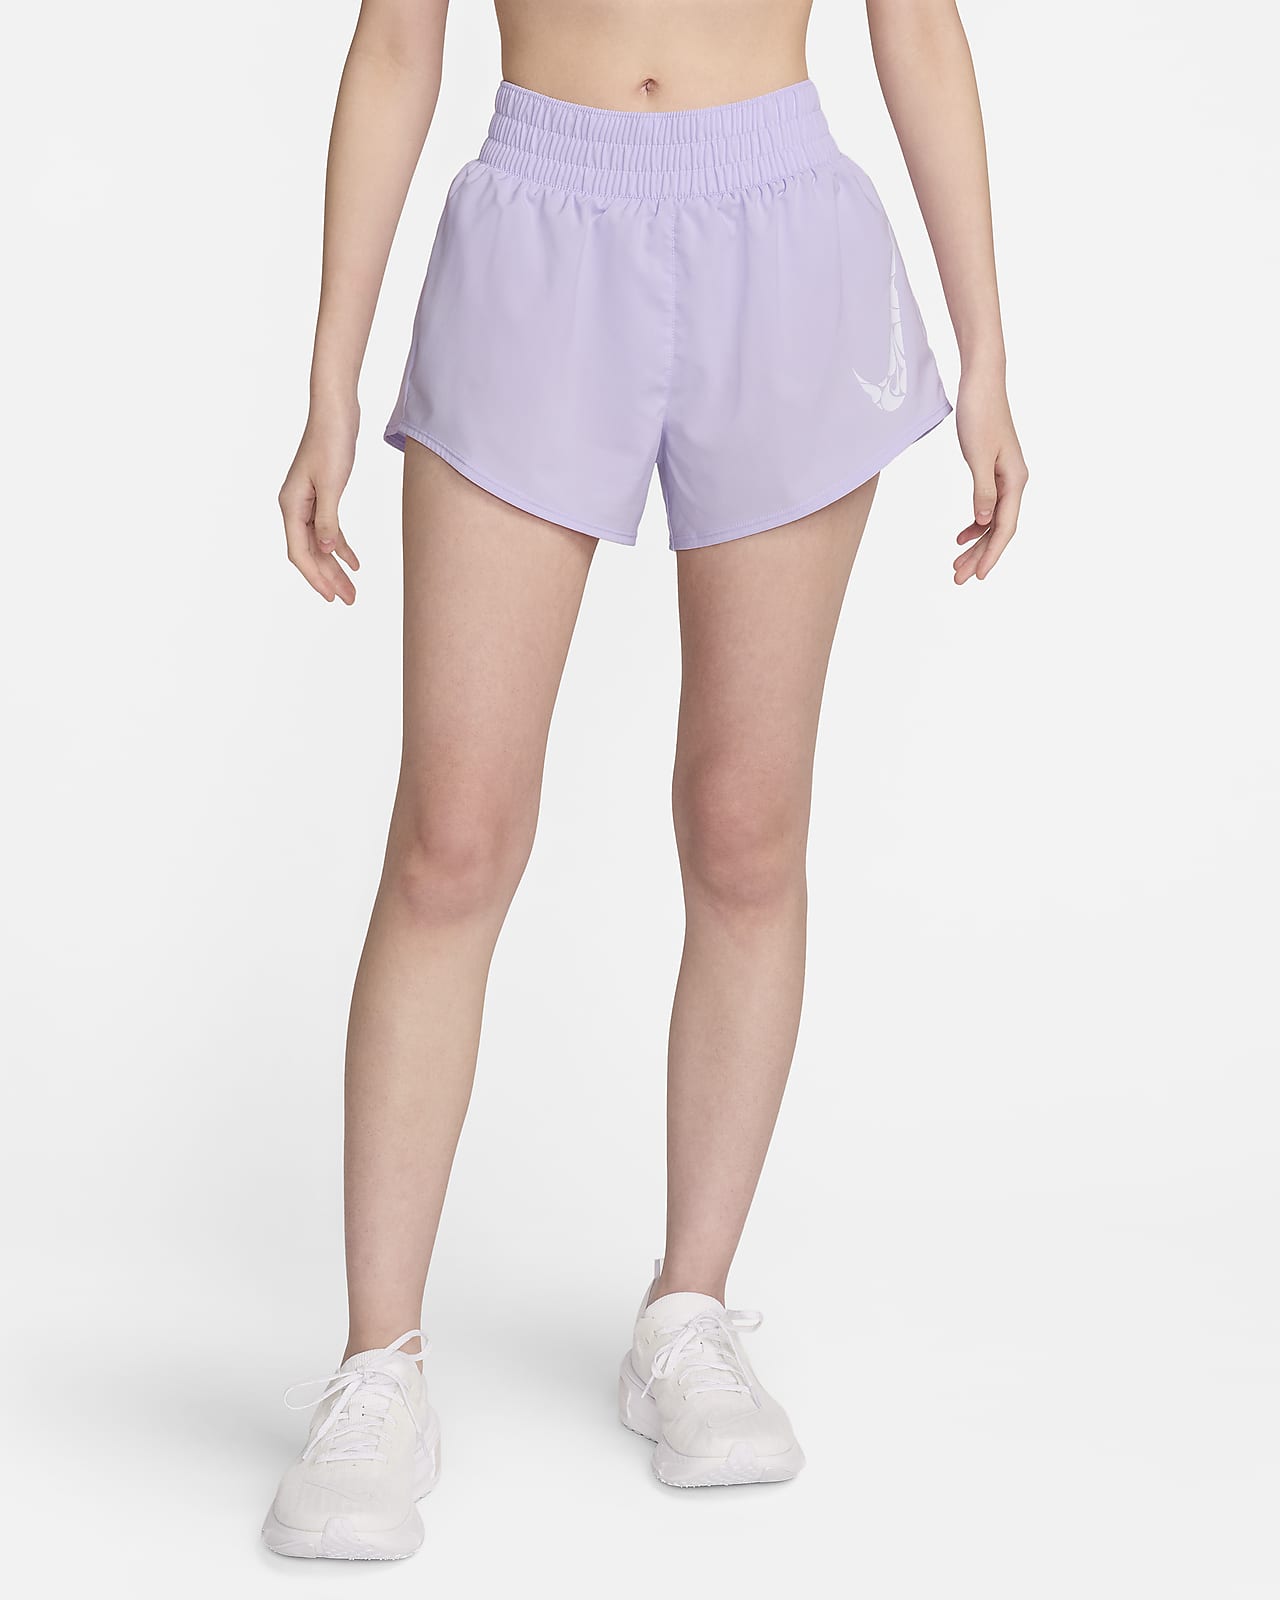 The One Short 3 - Women's